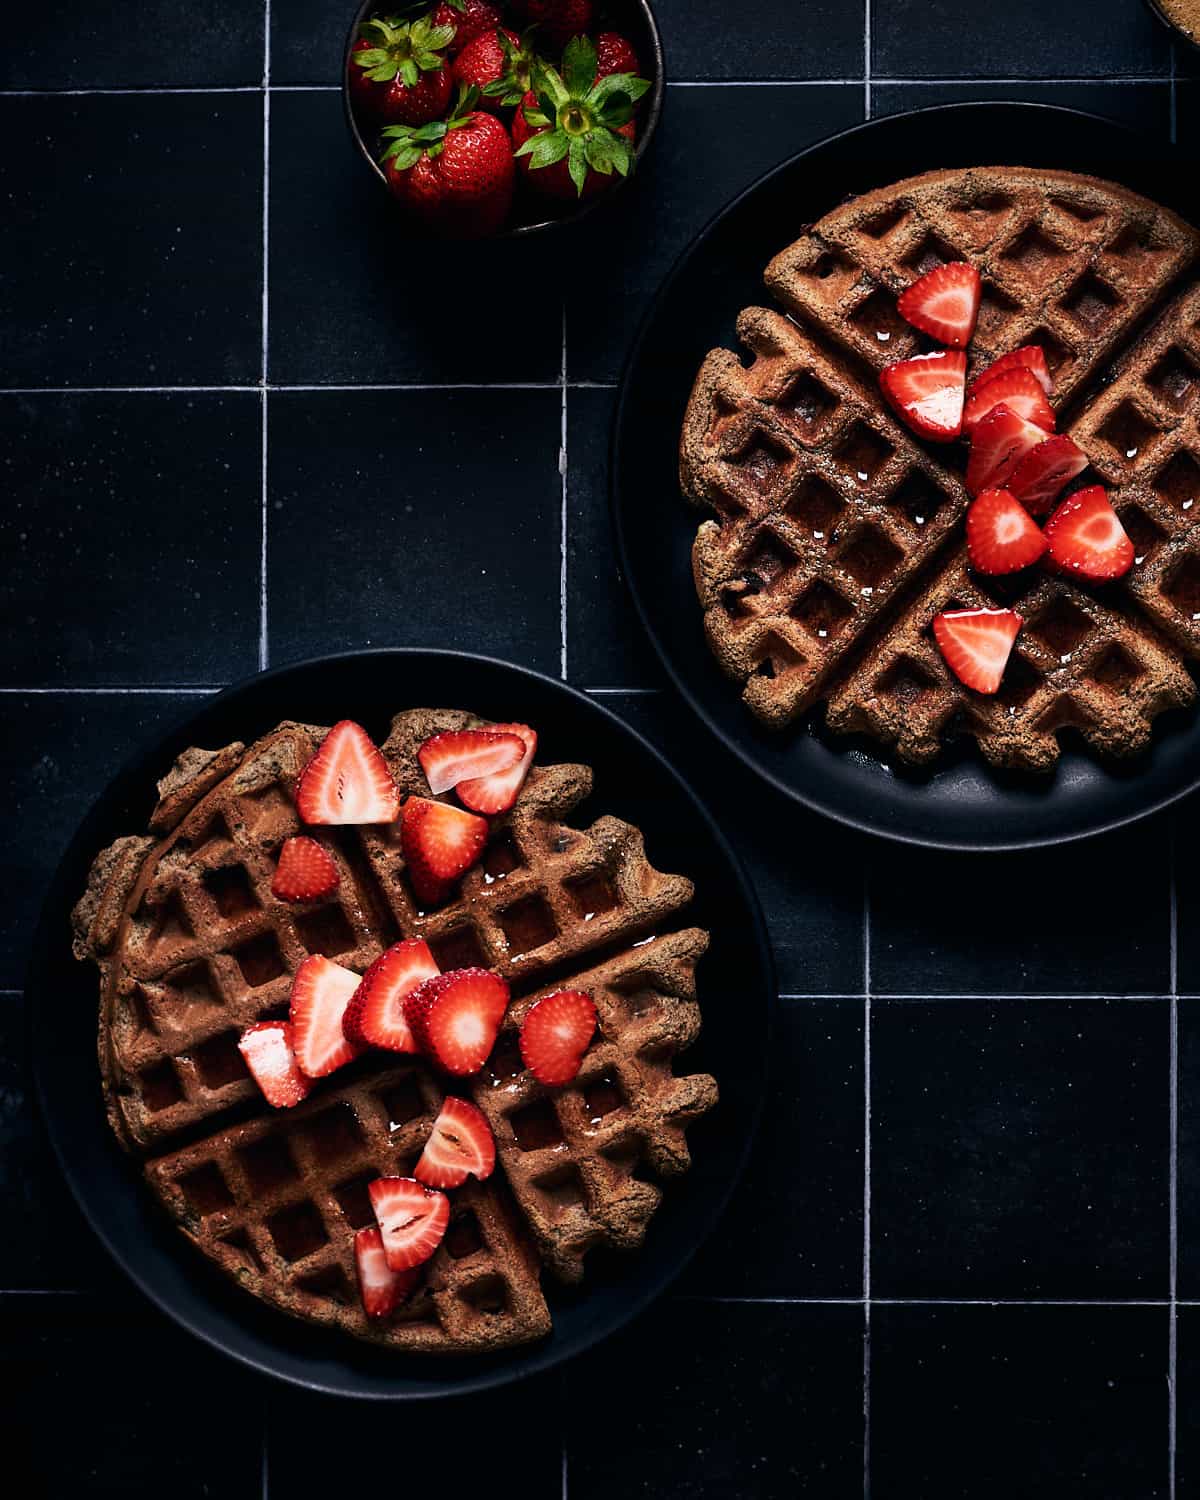 Overhead view of two plates of waffles with strawberries and maple syrup on top.